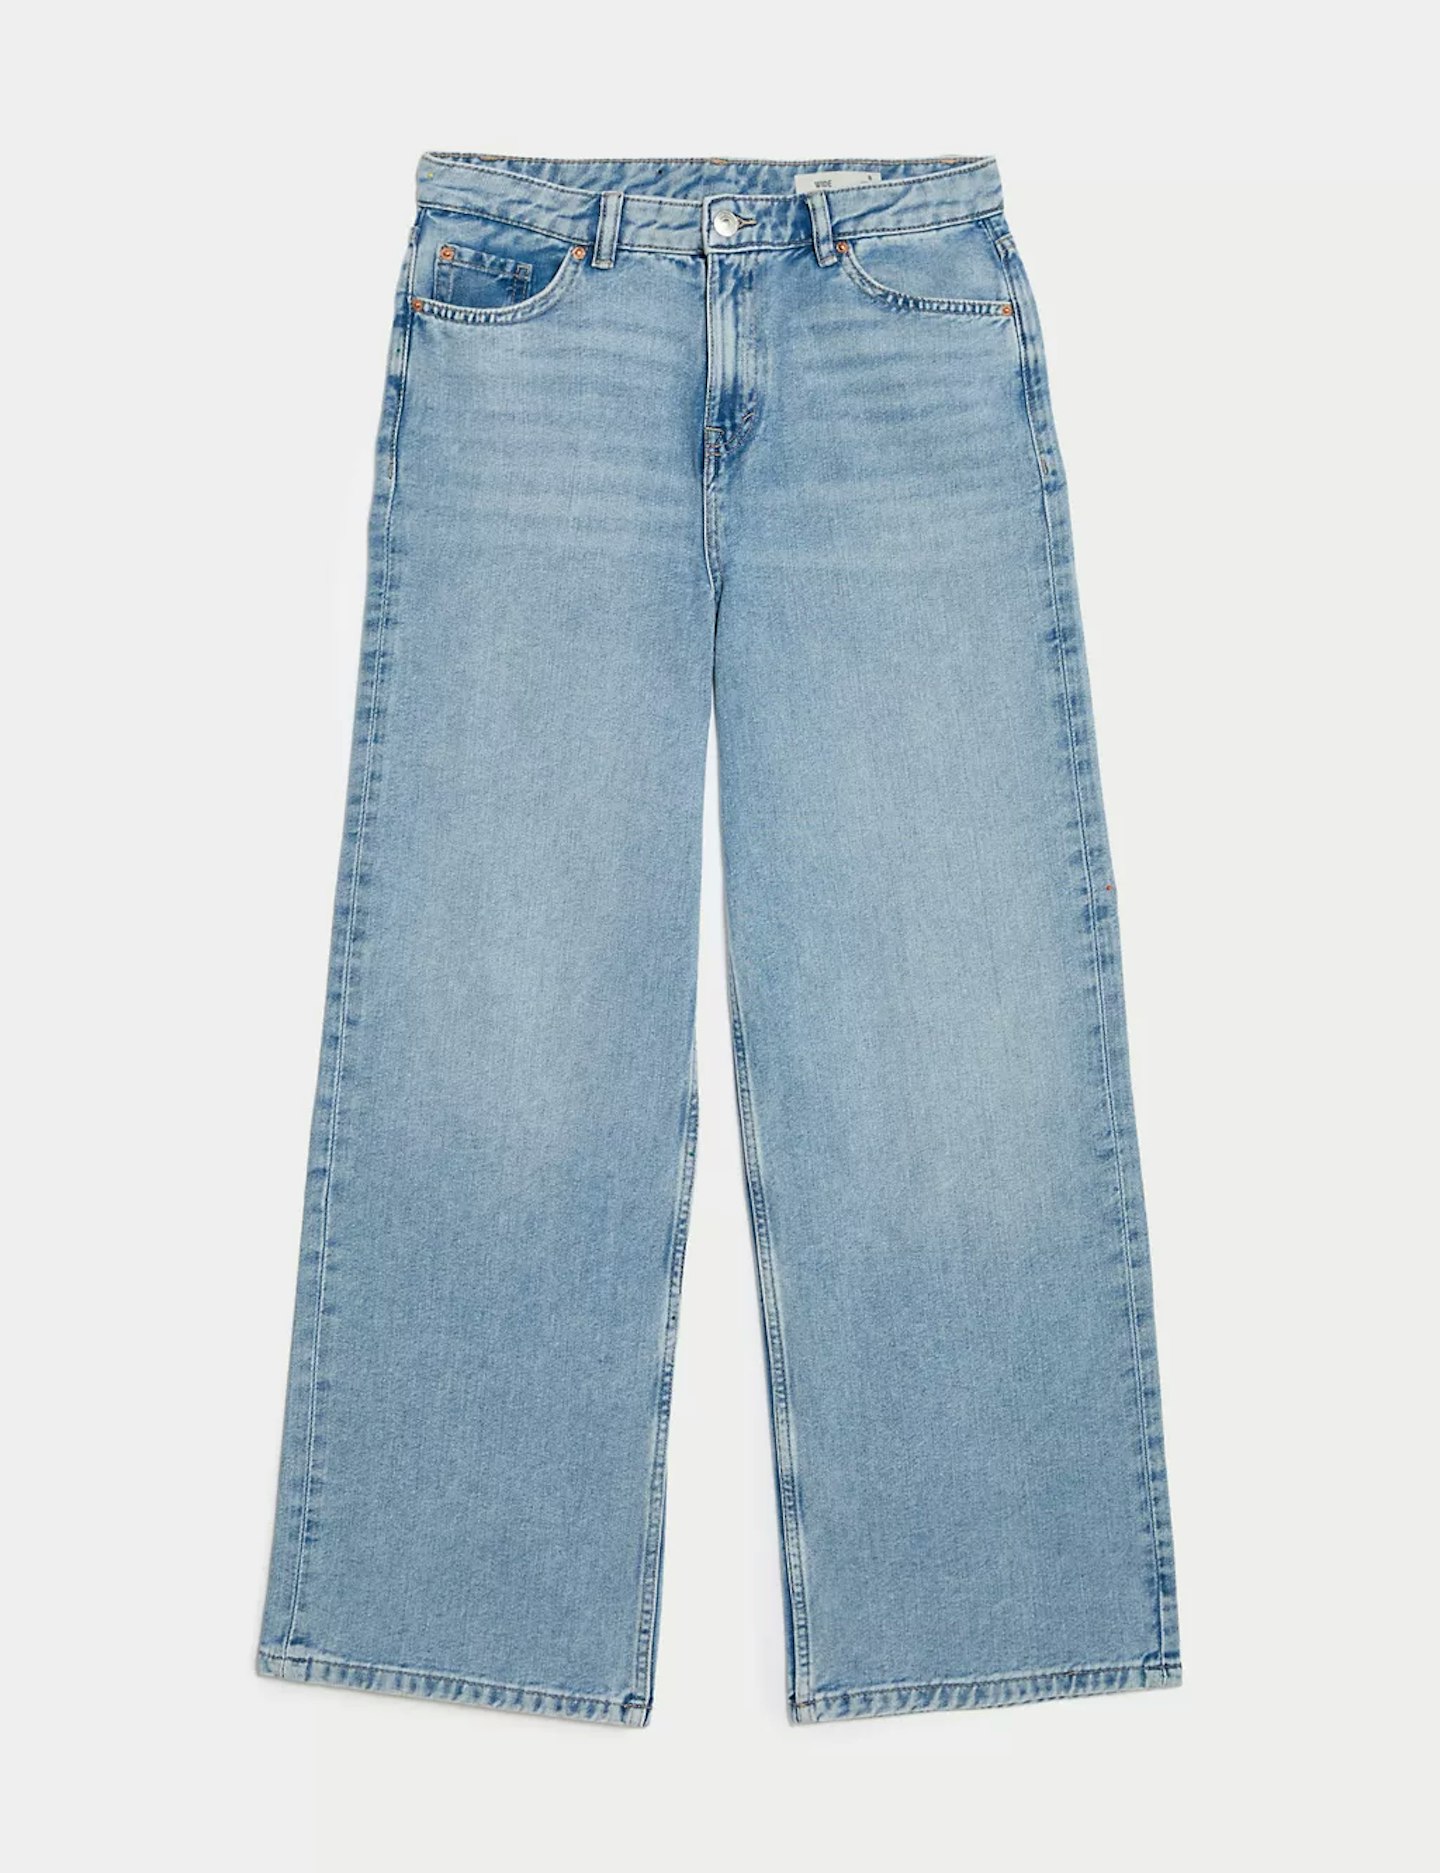 M&S, Slouchy Mid Rise Wide Leg Jeans